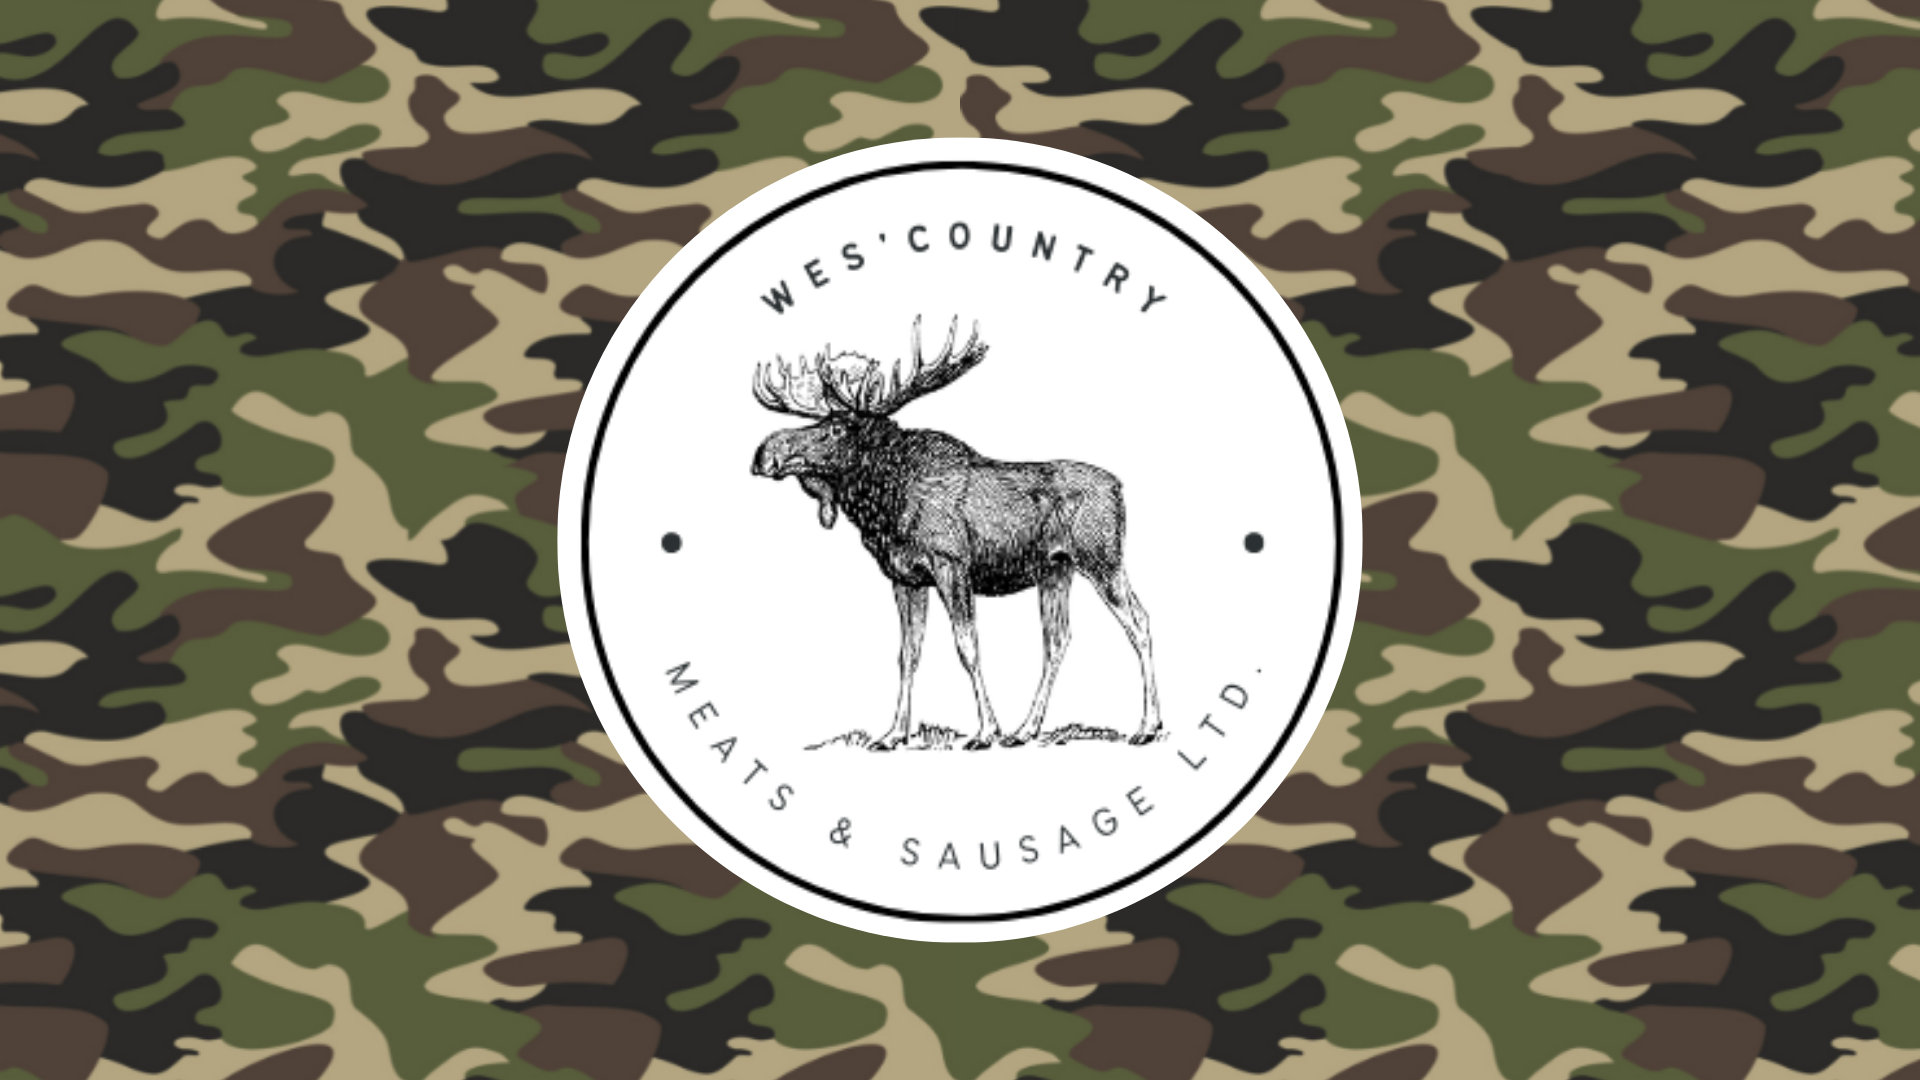 Wes’ Country Meats and Sausage takes business online with help from our Digital Service Squad